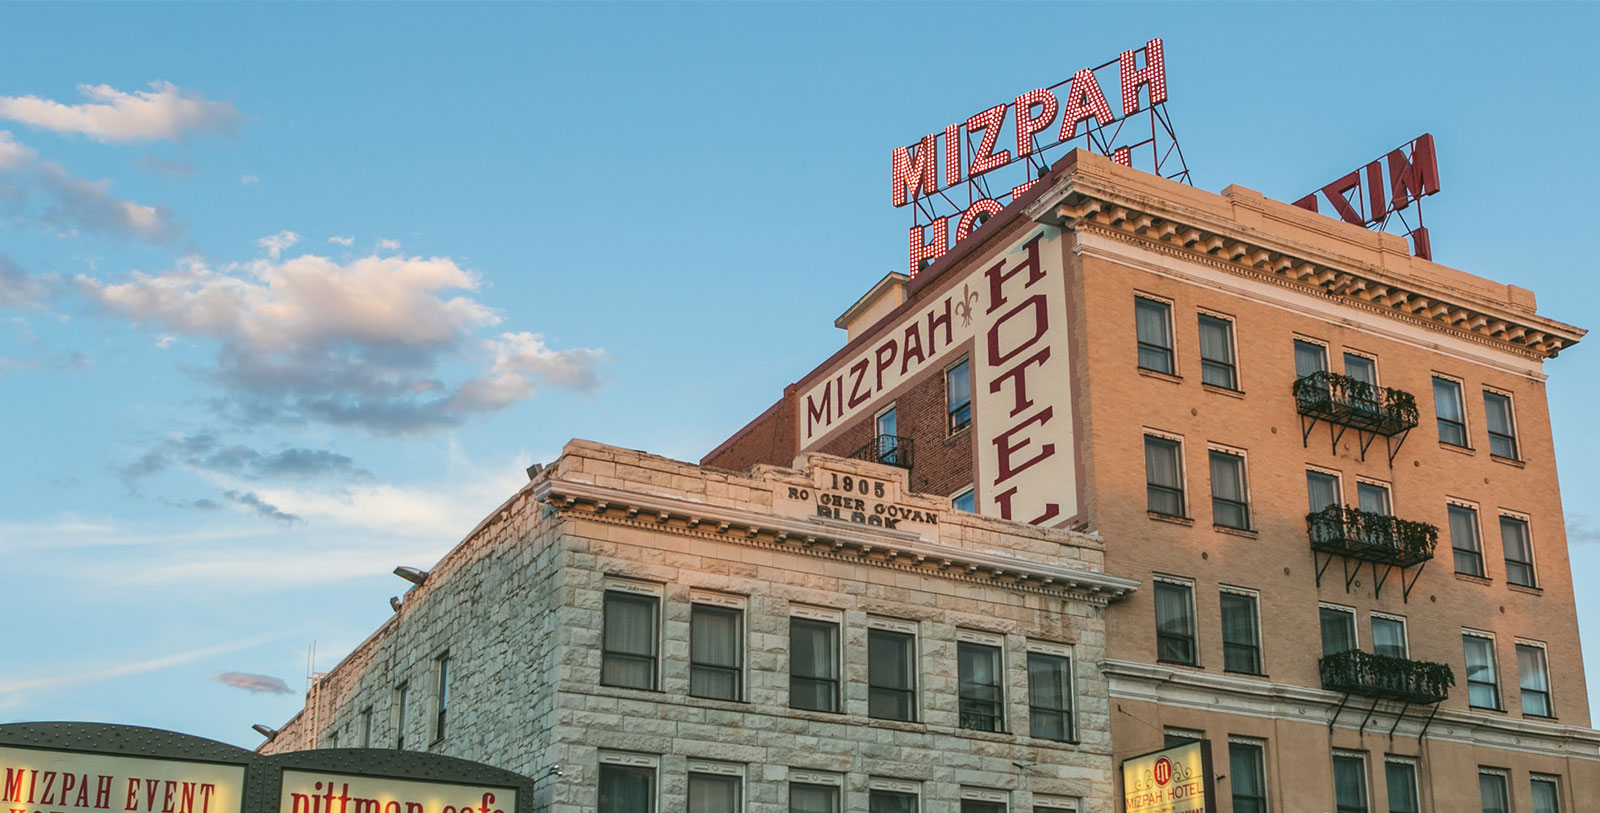 Image of Hotel Exterior, Mizpah Hotel in Topah, Nevada, 1907, Member of Historic Hotels of America, Experience